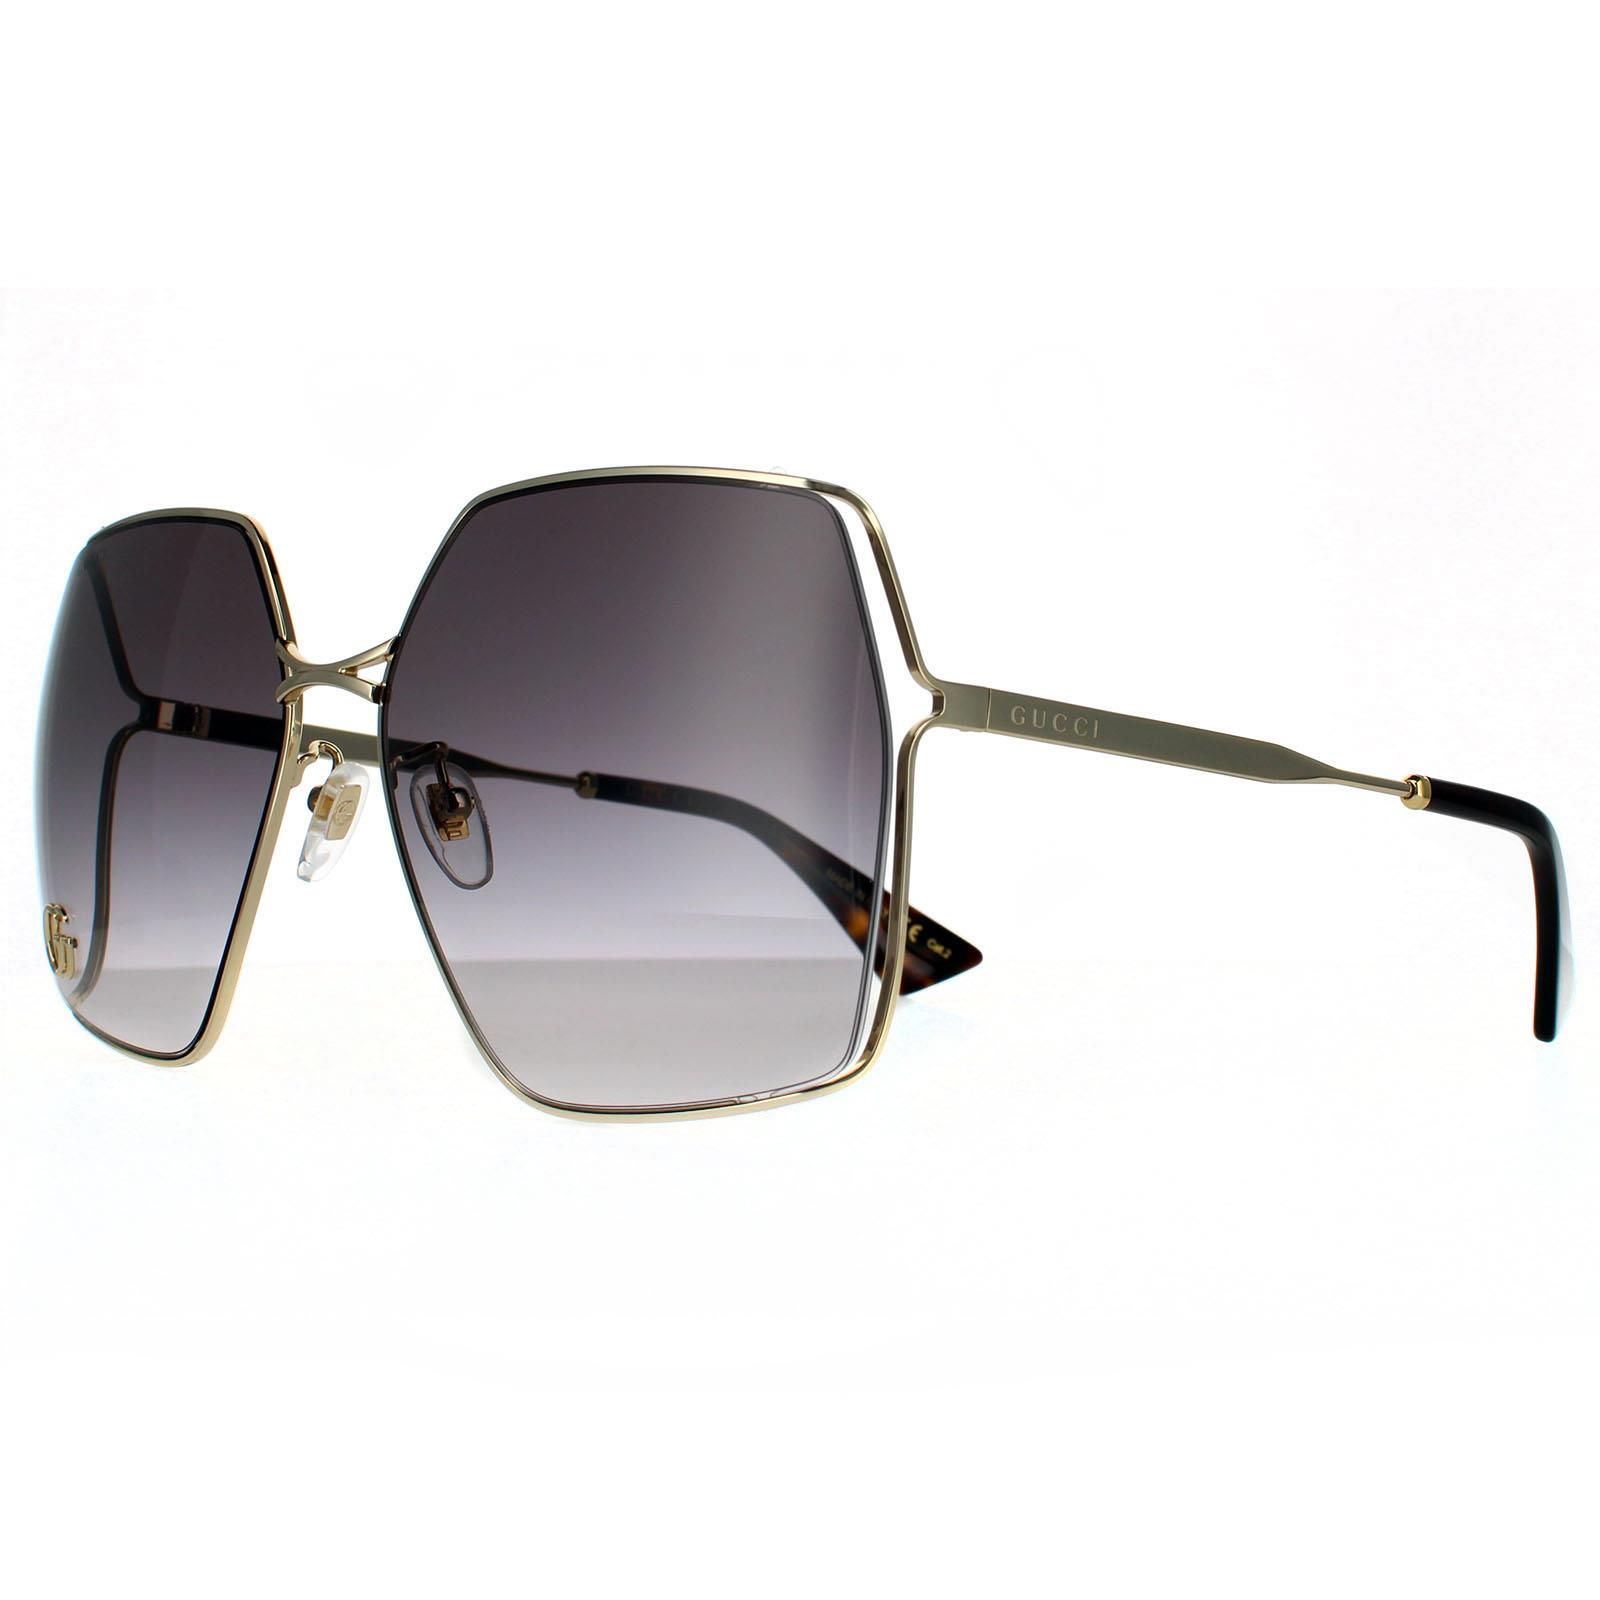 Gucci Square Womens Gold  Grey Gradient  Sunglasses Gucci are a lightweight and minimal oversized design with a metal frame. One of the large lenses features a metal interlocking GG logo and slim temples are engraved with the text Gucci logo.